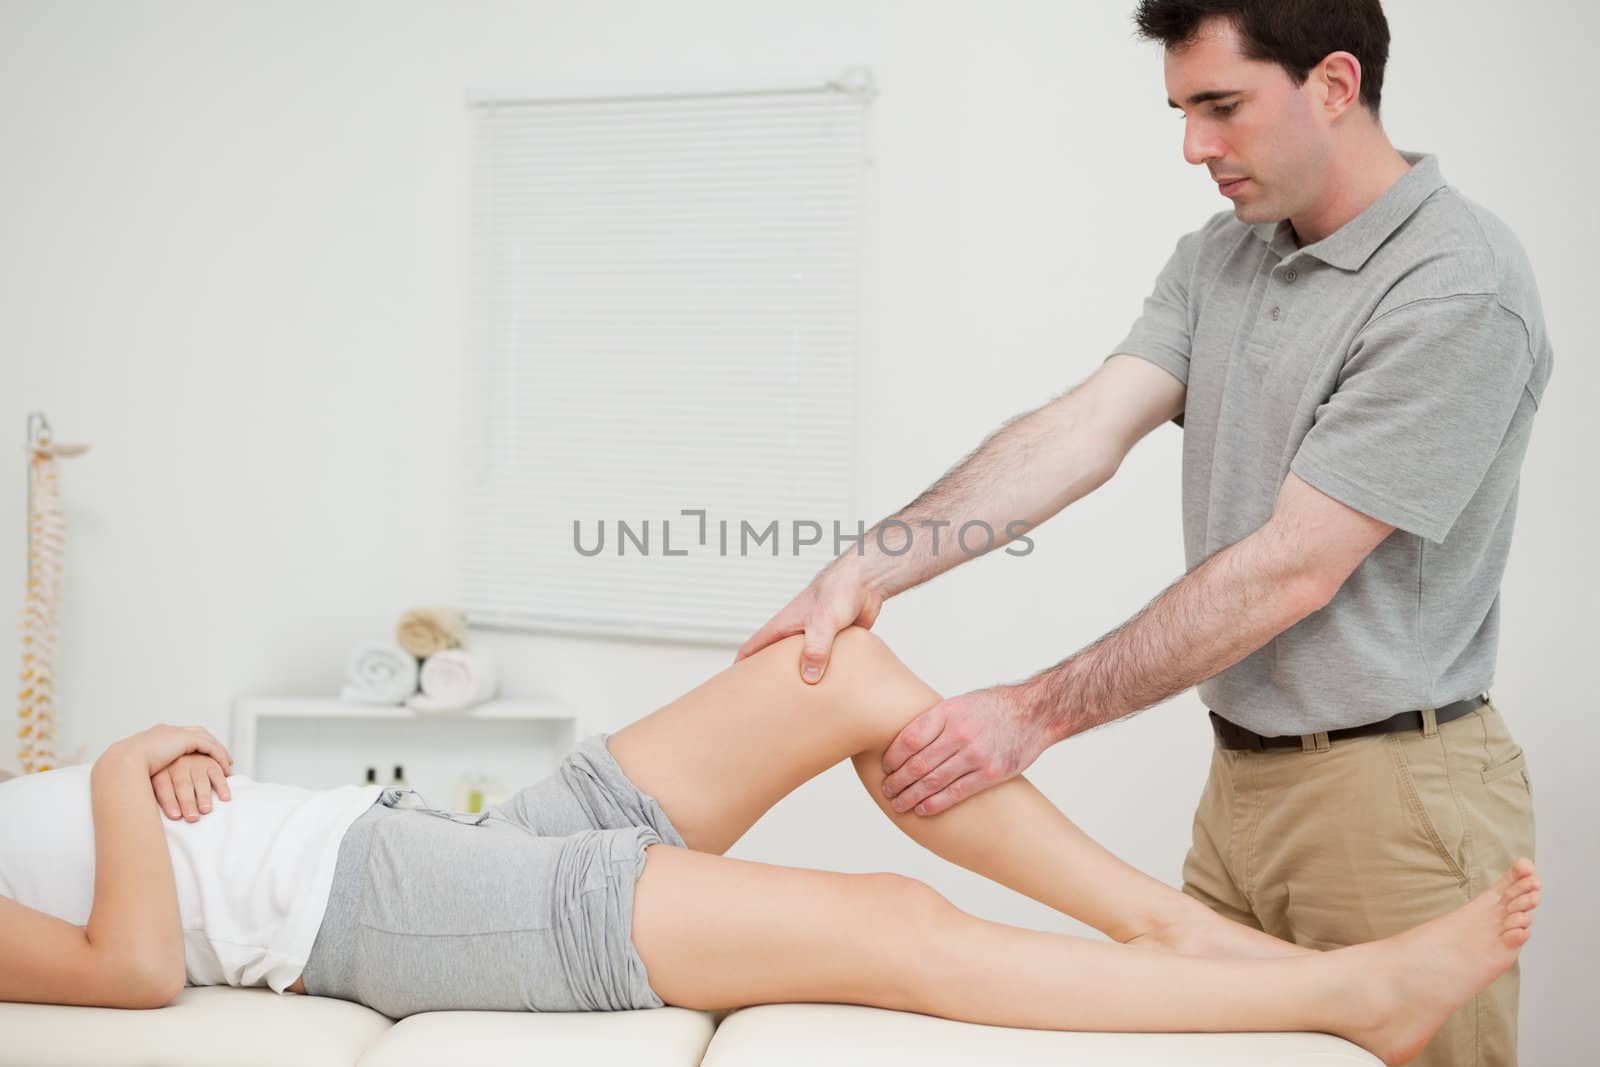 Physiotherapist examining the knee of his patient while touching it in a room